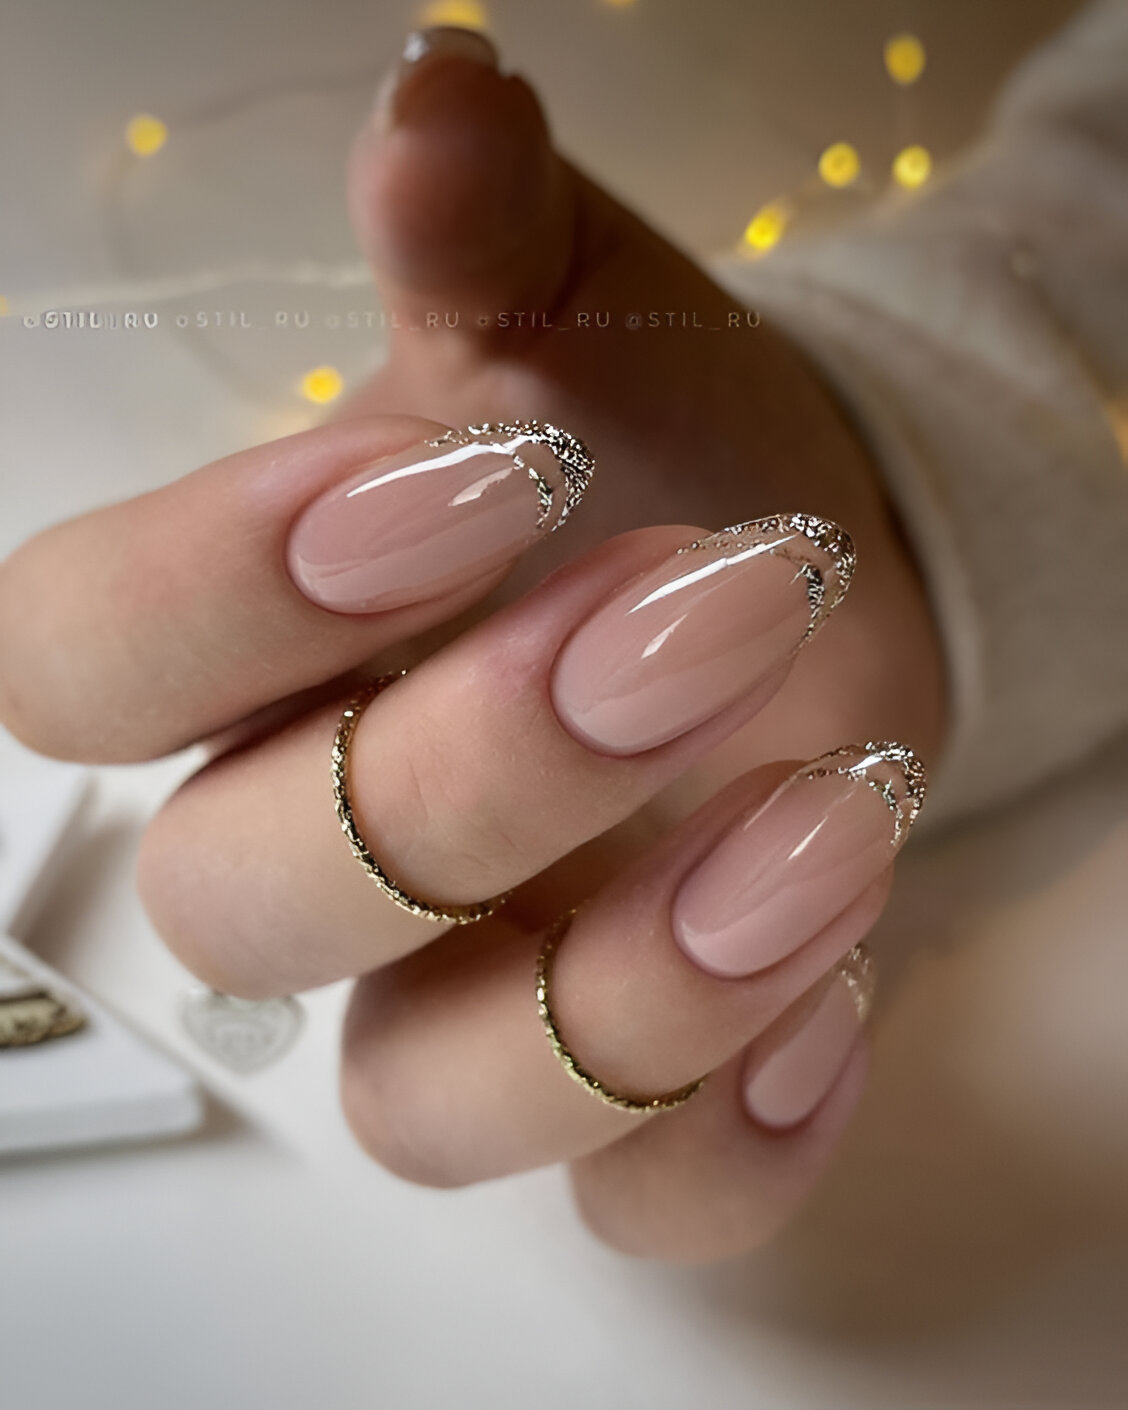 Short Almond French Tips 10